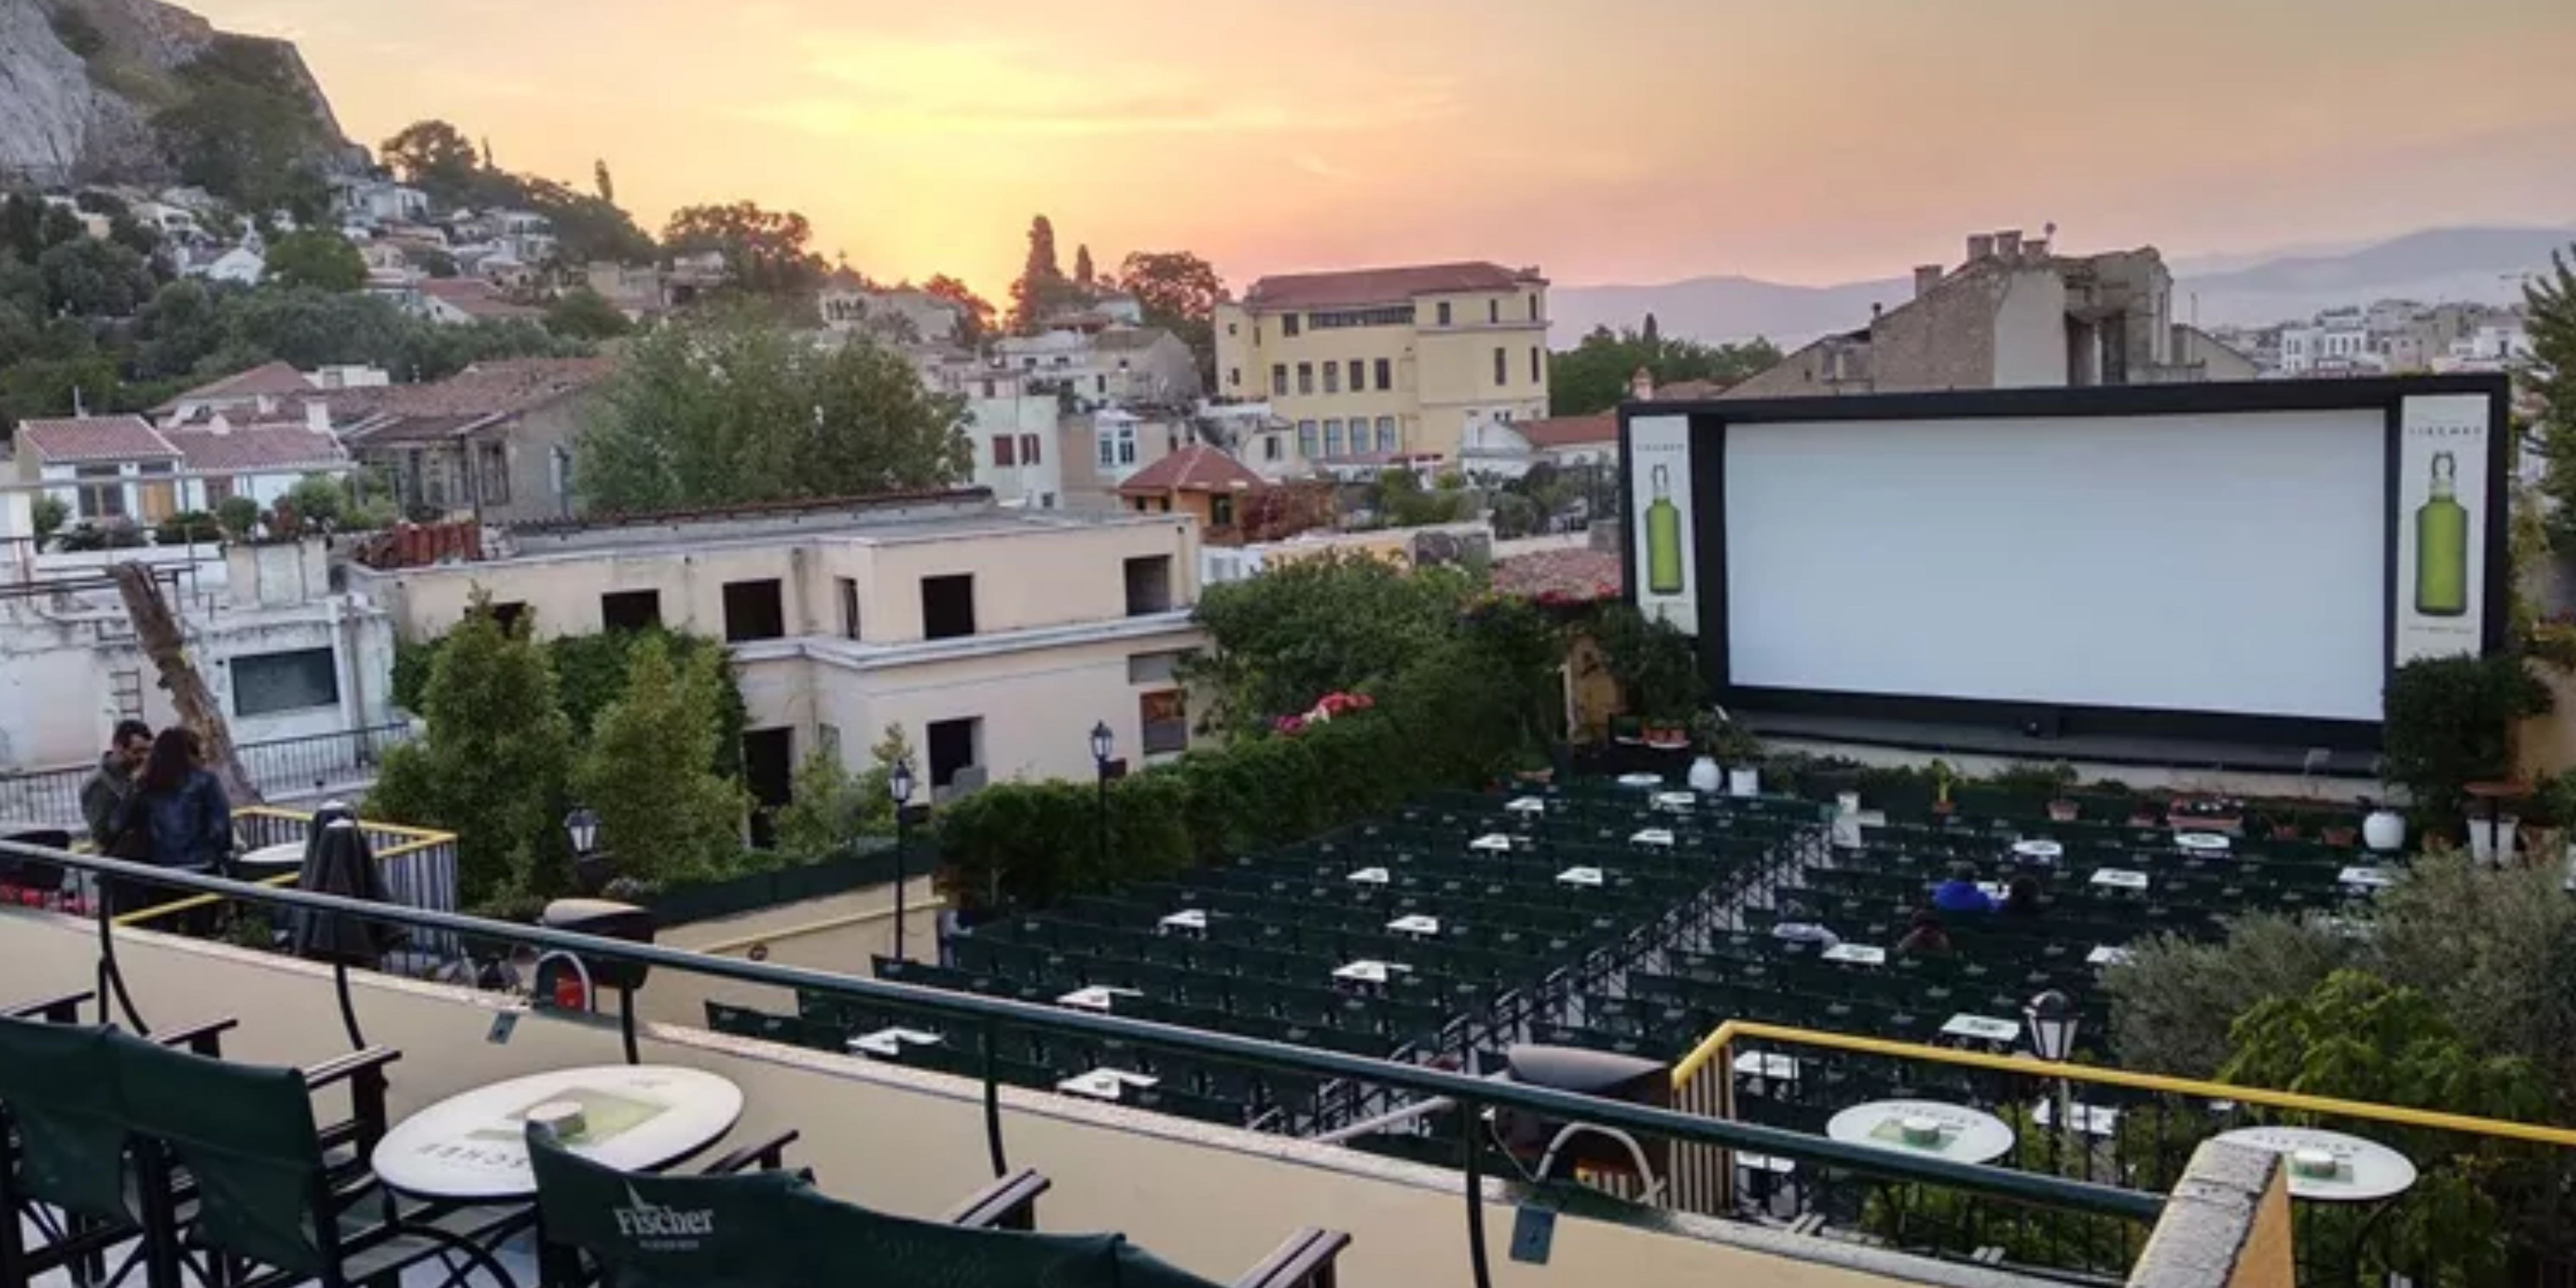 Outdoor movie theater Cine Paris in Athens with seating and a large screen at dusk.